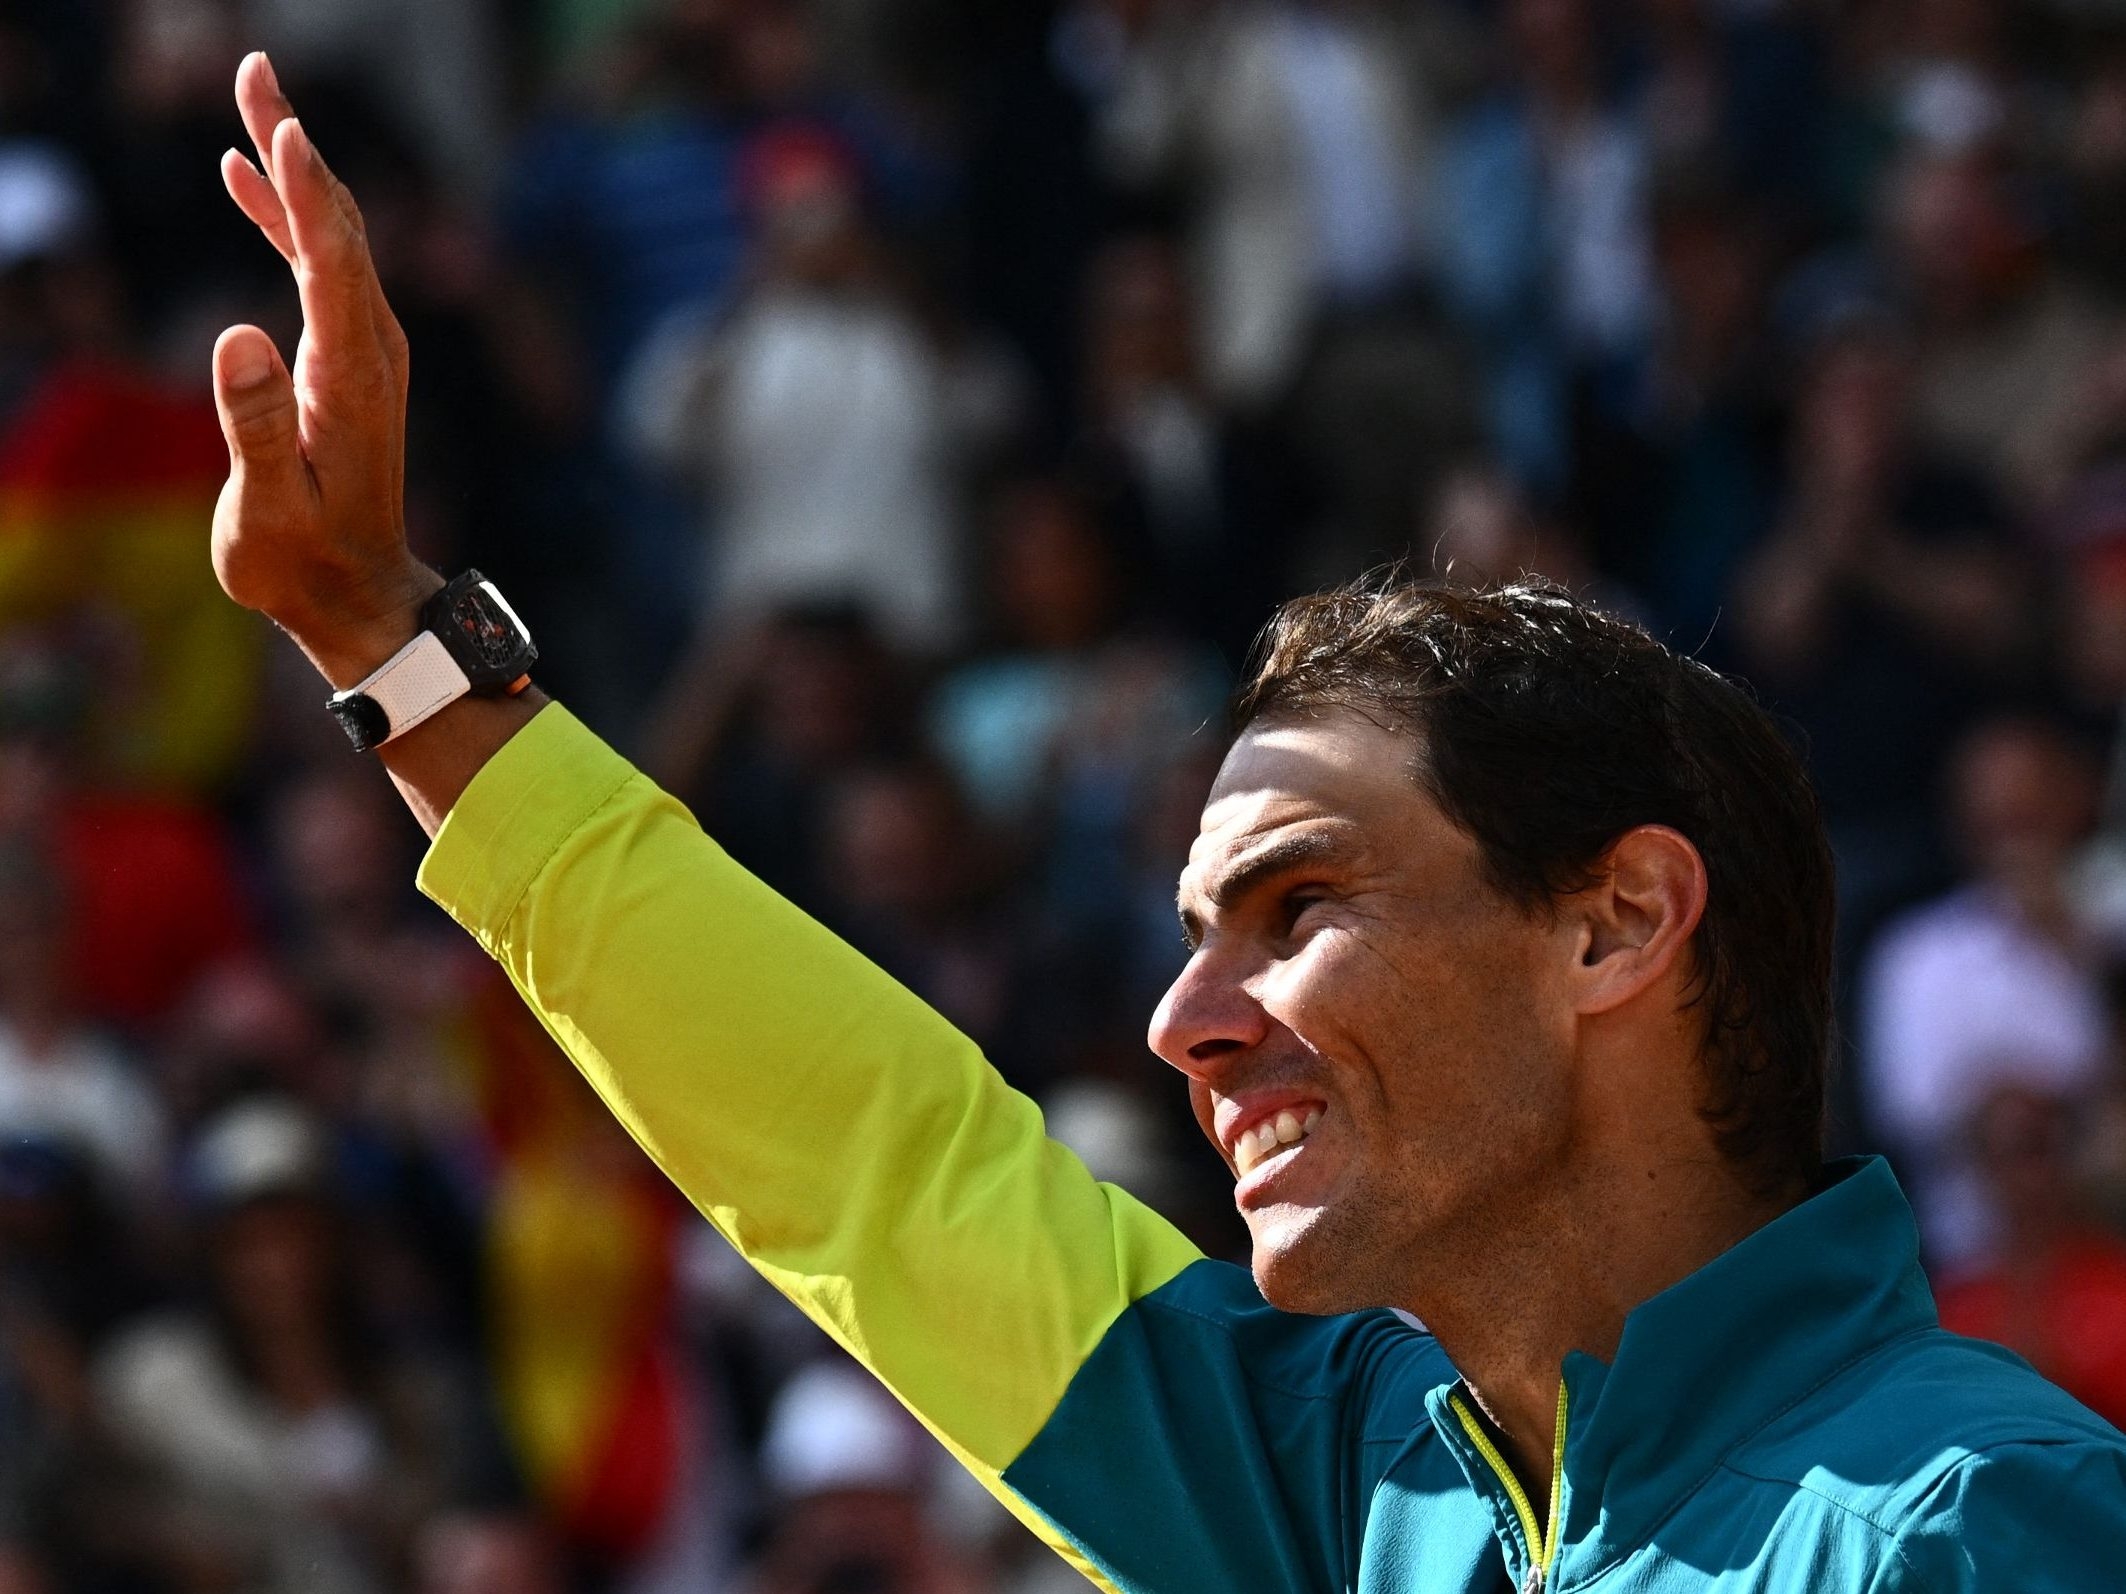 Rafael Nadal withdraws from Roland Garros due to hip injury